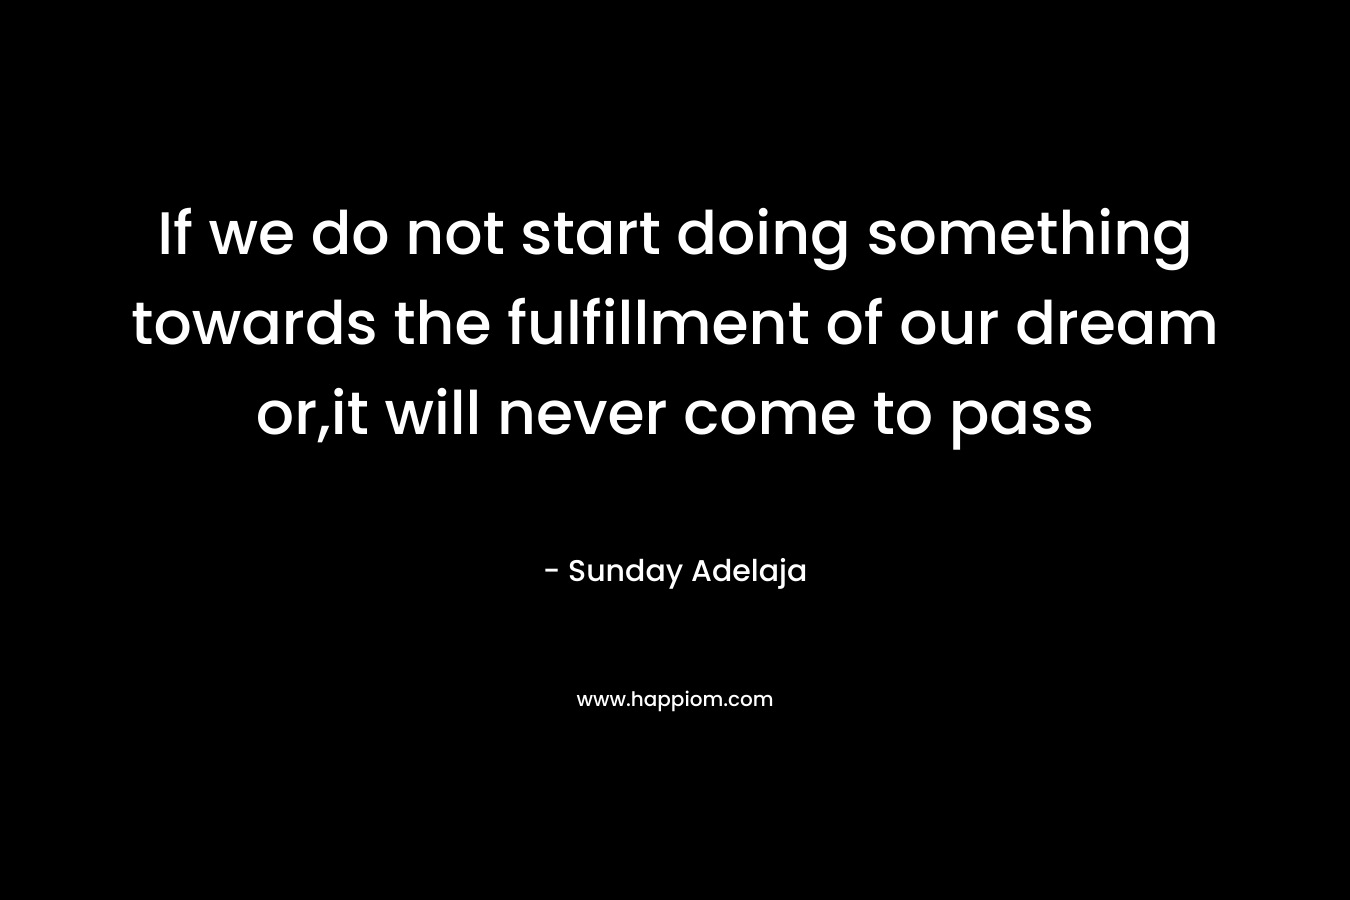 If we do not start doing something towards the fulfillment of our dream or,it will never come to pass